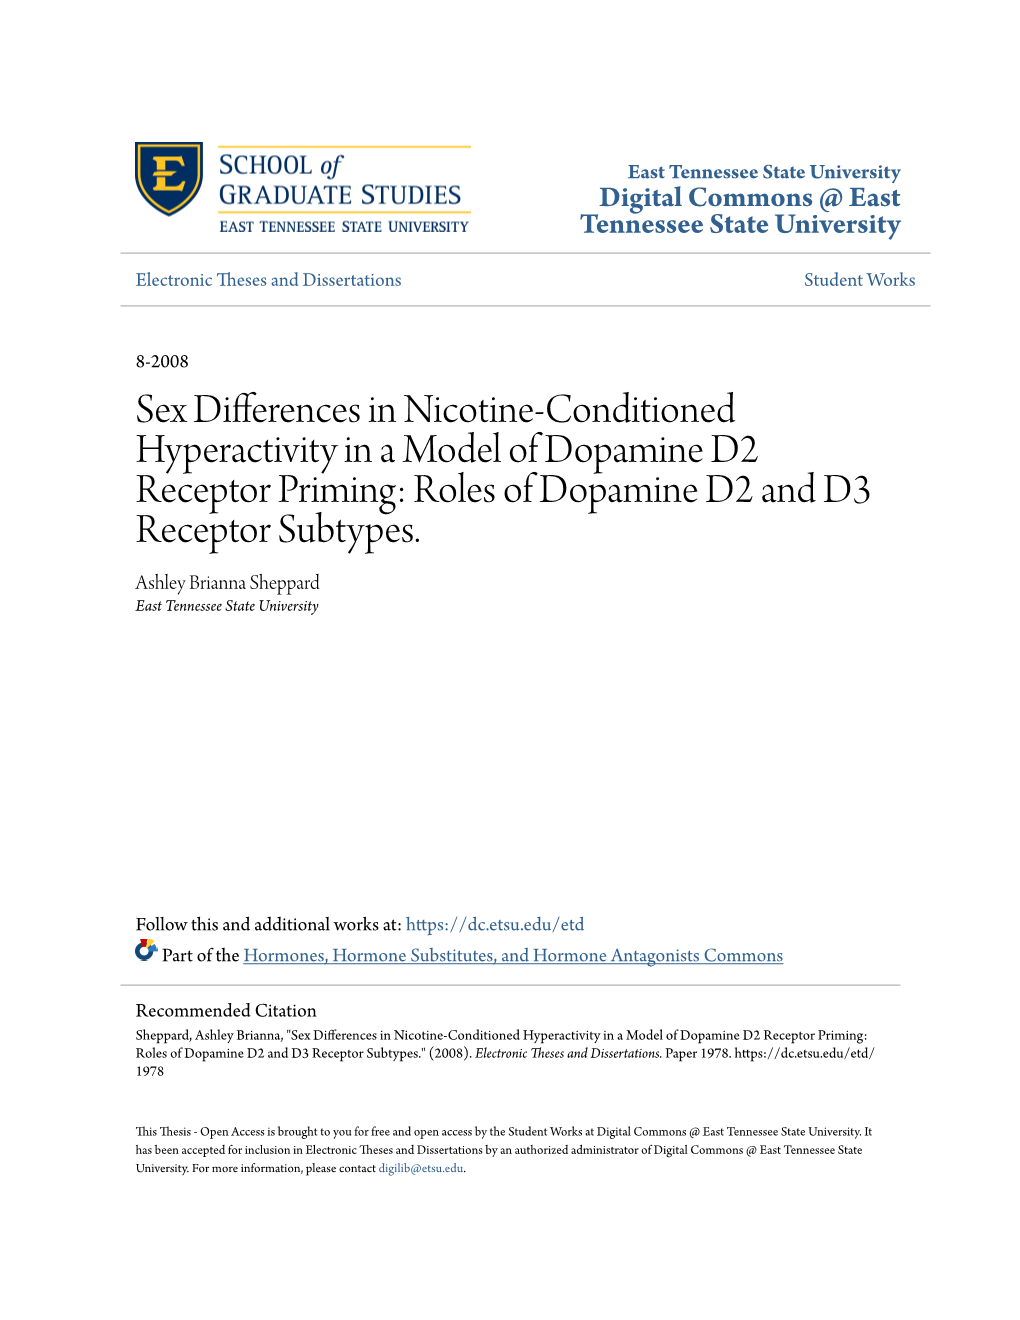 Sex Differences in Nicotine-Conditioned Hyperactivity in a Model of Dopamine D2 Receptor Priming: Roles of Dopamine D2 and D3 Receptor Subtypes